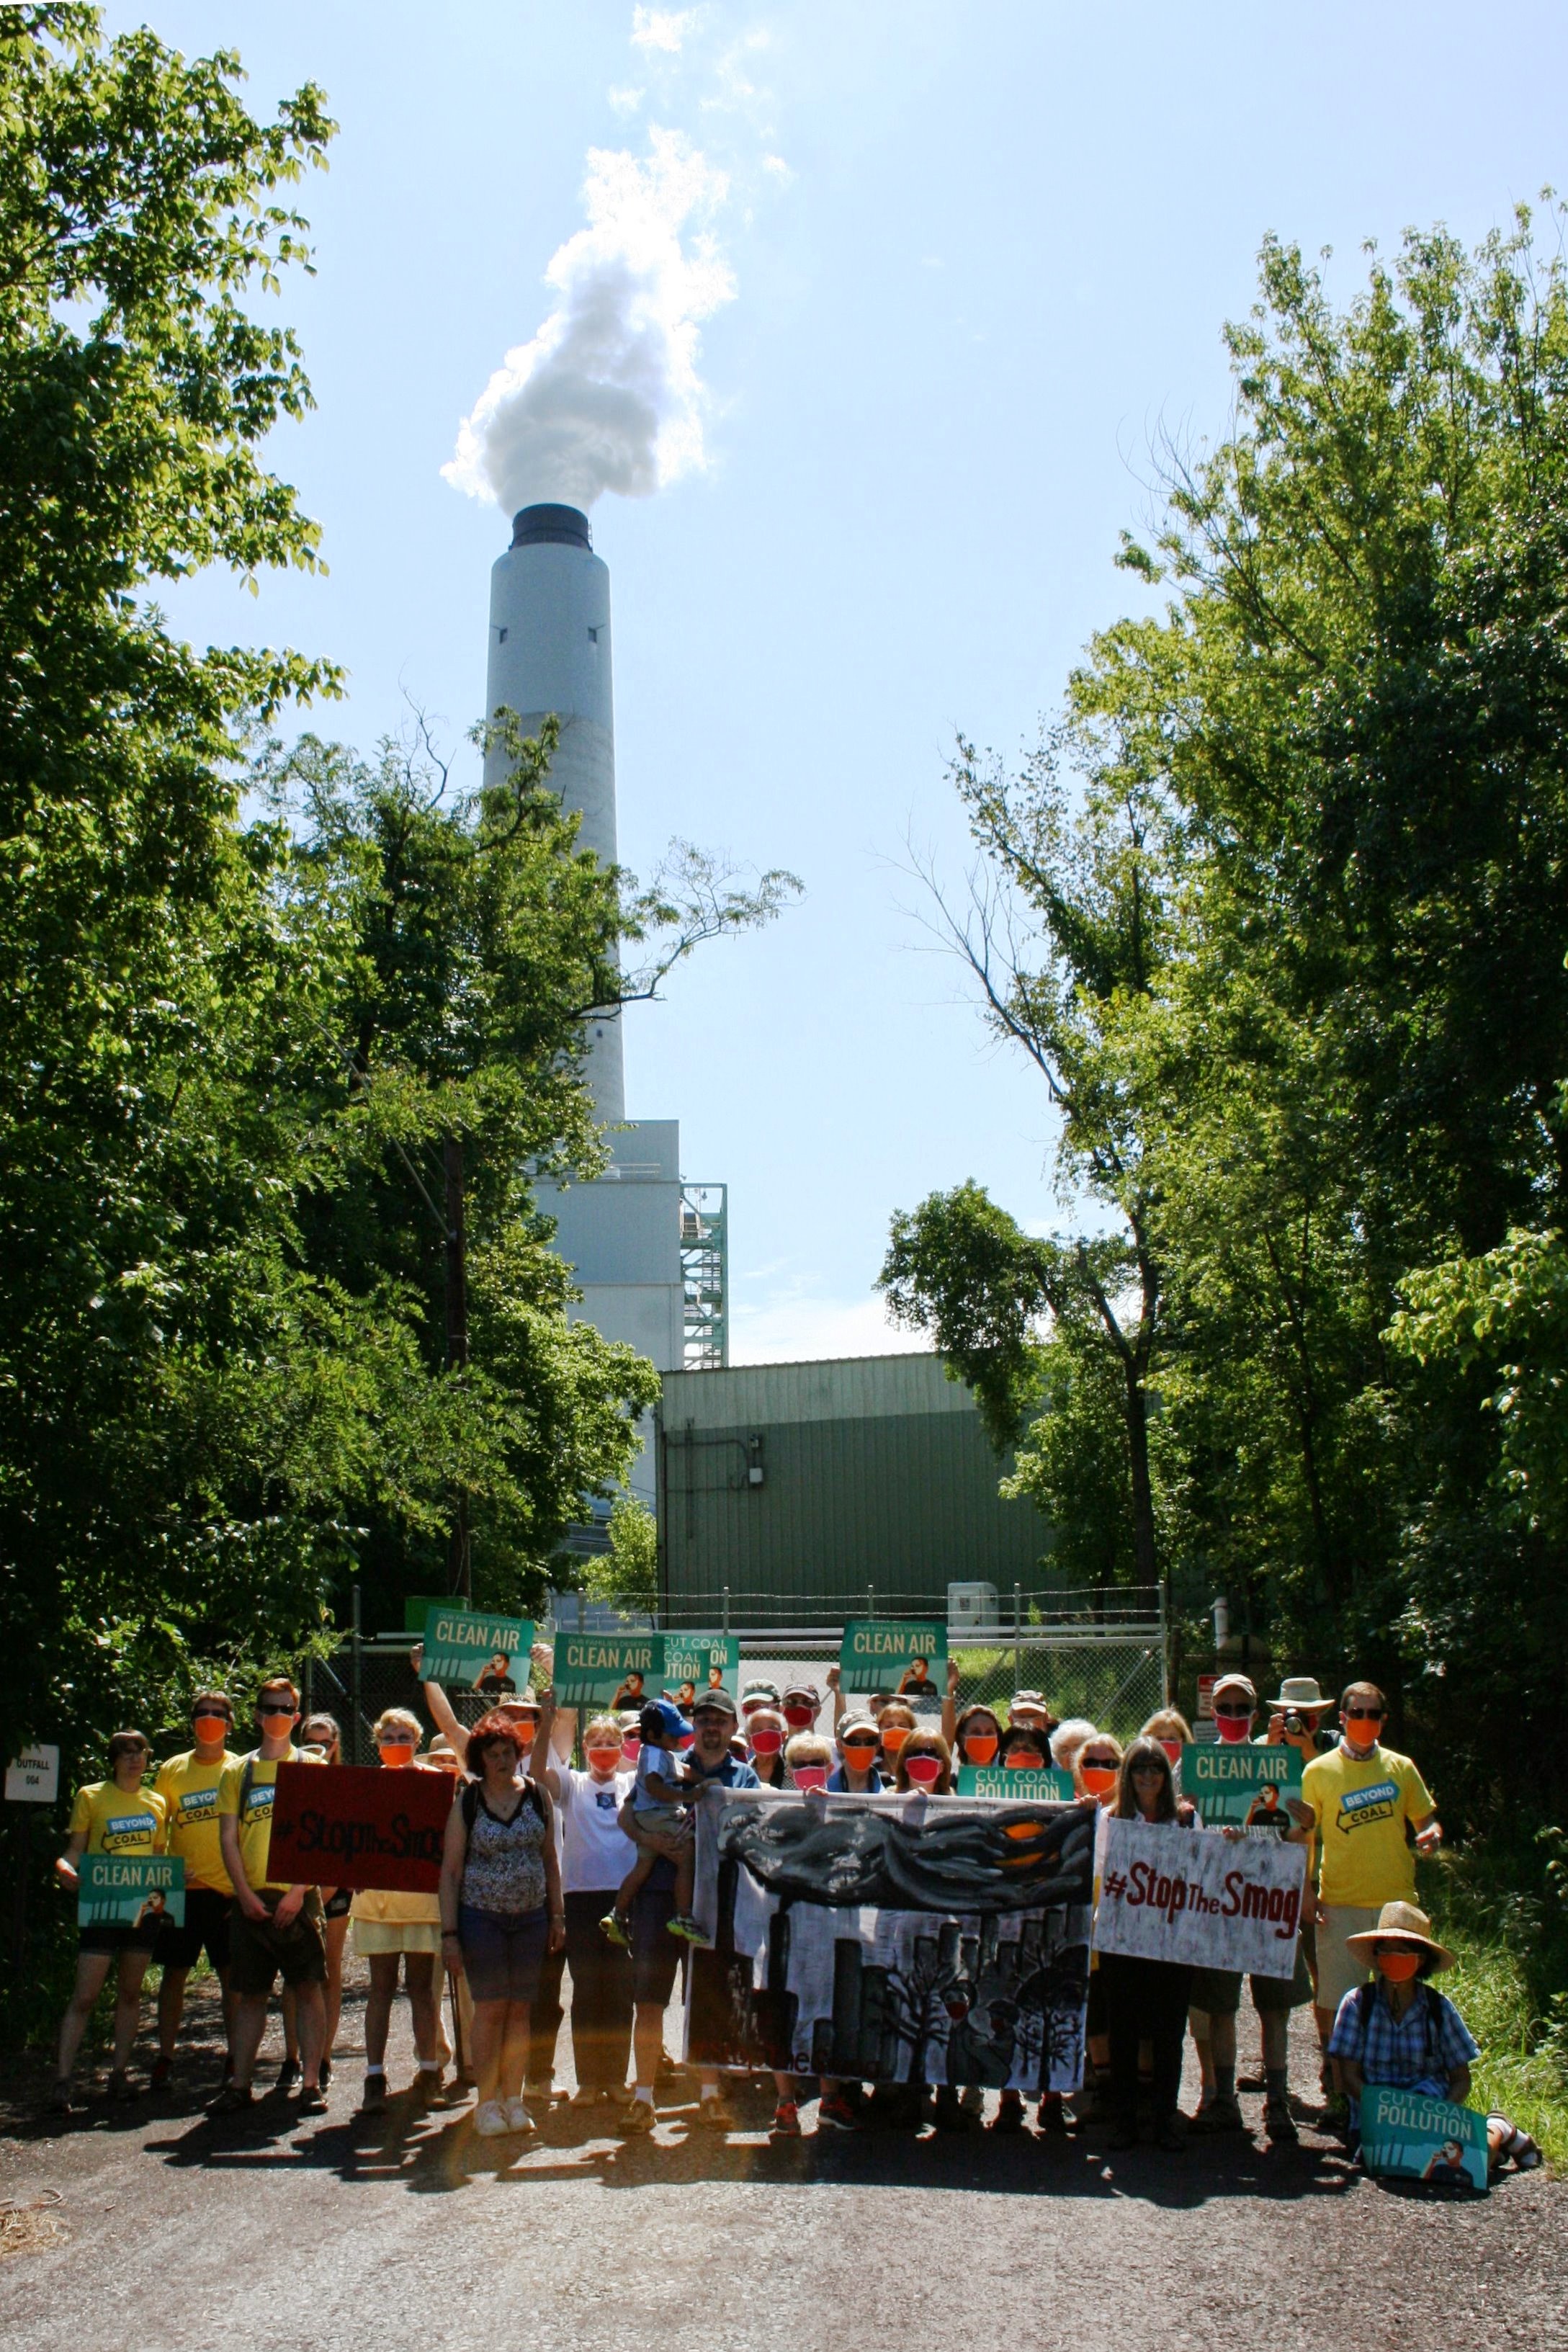 Kayakers holding a sign that says "retire" in front of the Crane coal plant.